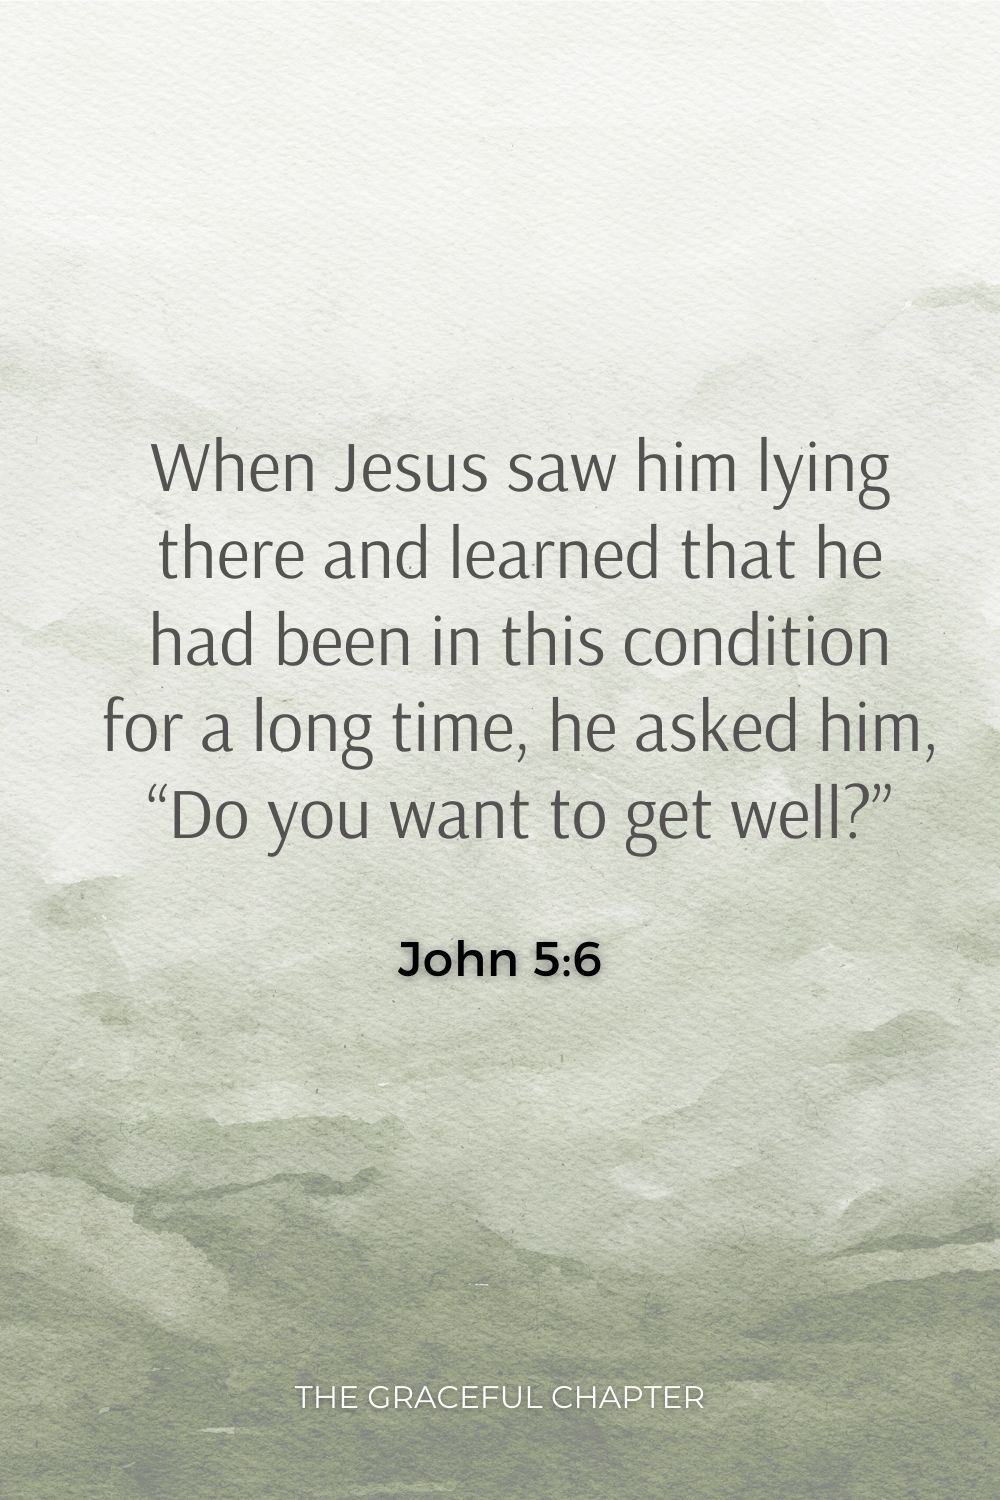 When Jesus saw him lying there and learned that he had been in this condition for a long time, he asked him, “Do you want to get well?” John 5:6